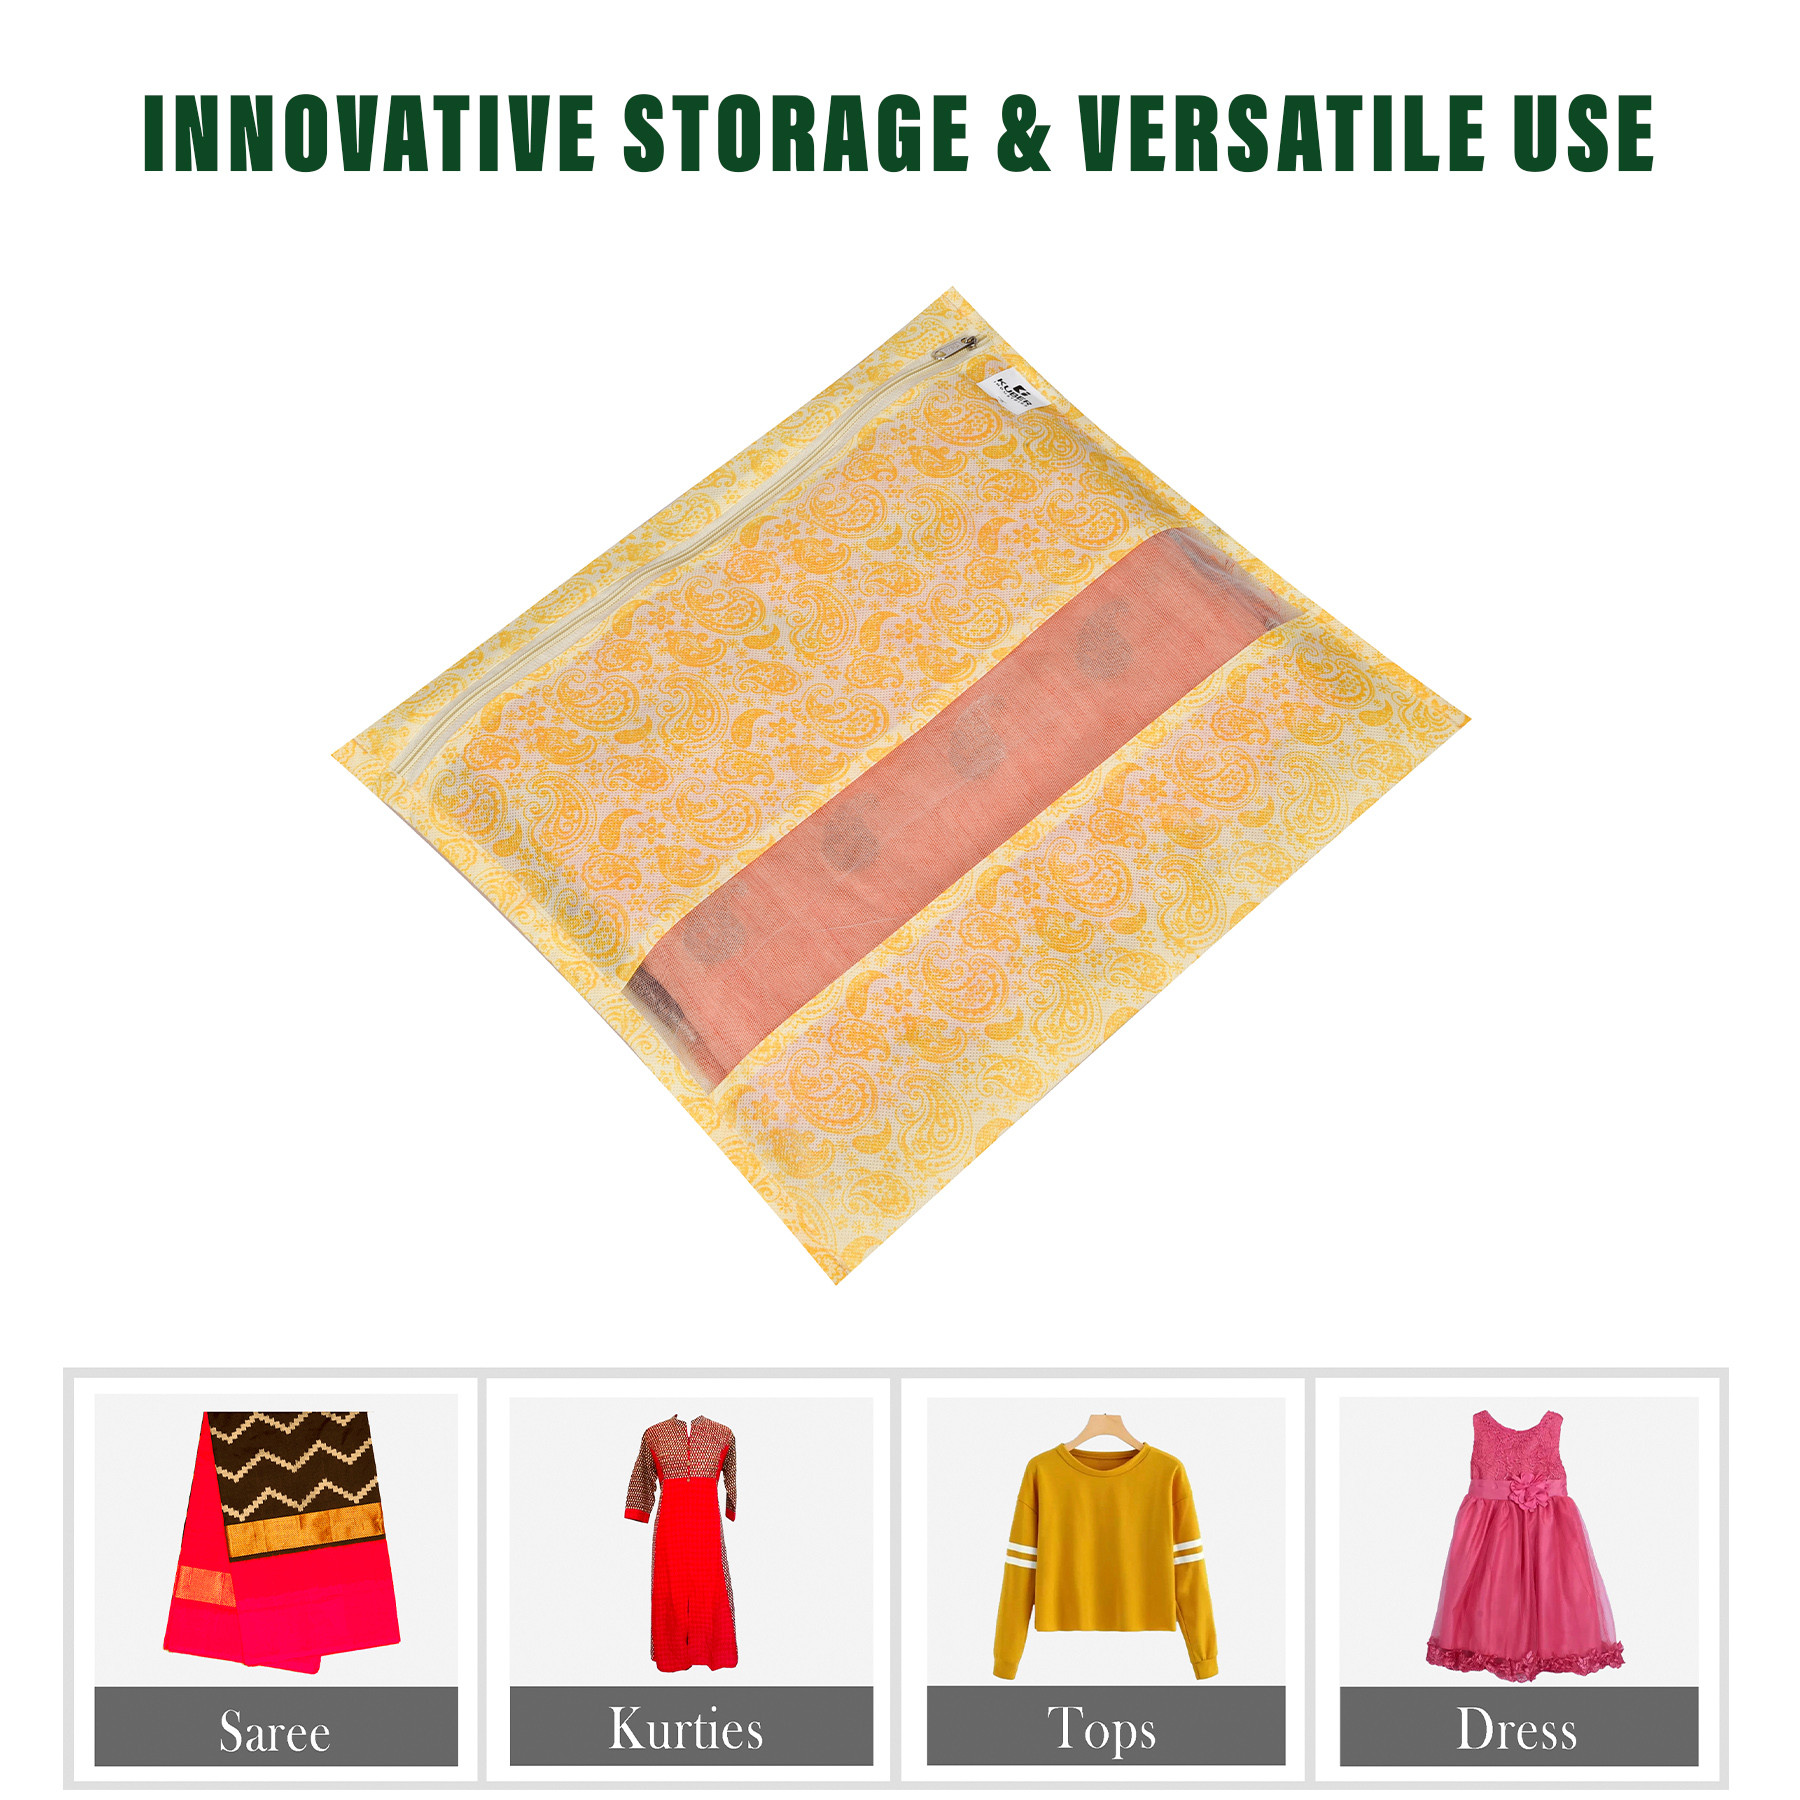 Kuber Industries Saree Bags | Clothes Bags for Storage | Non-Woven Wardrobe Organizer | Mesh Window Cloth Storage Bags Set | Single Packing Saree Bags | Printed | Gray & Yellow